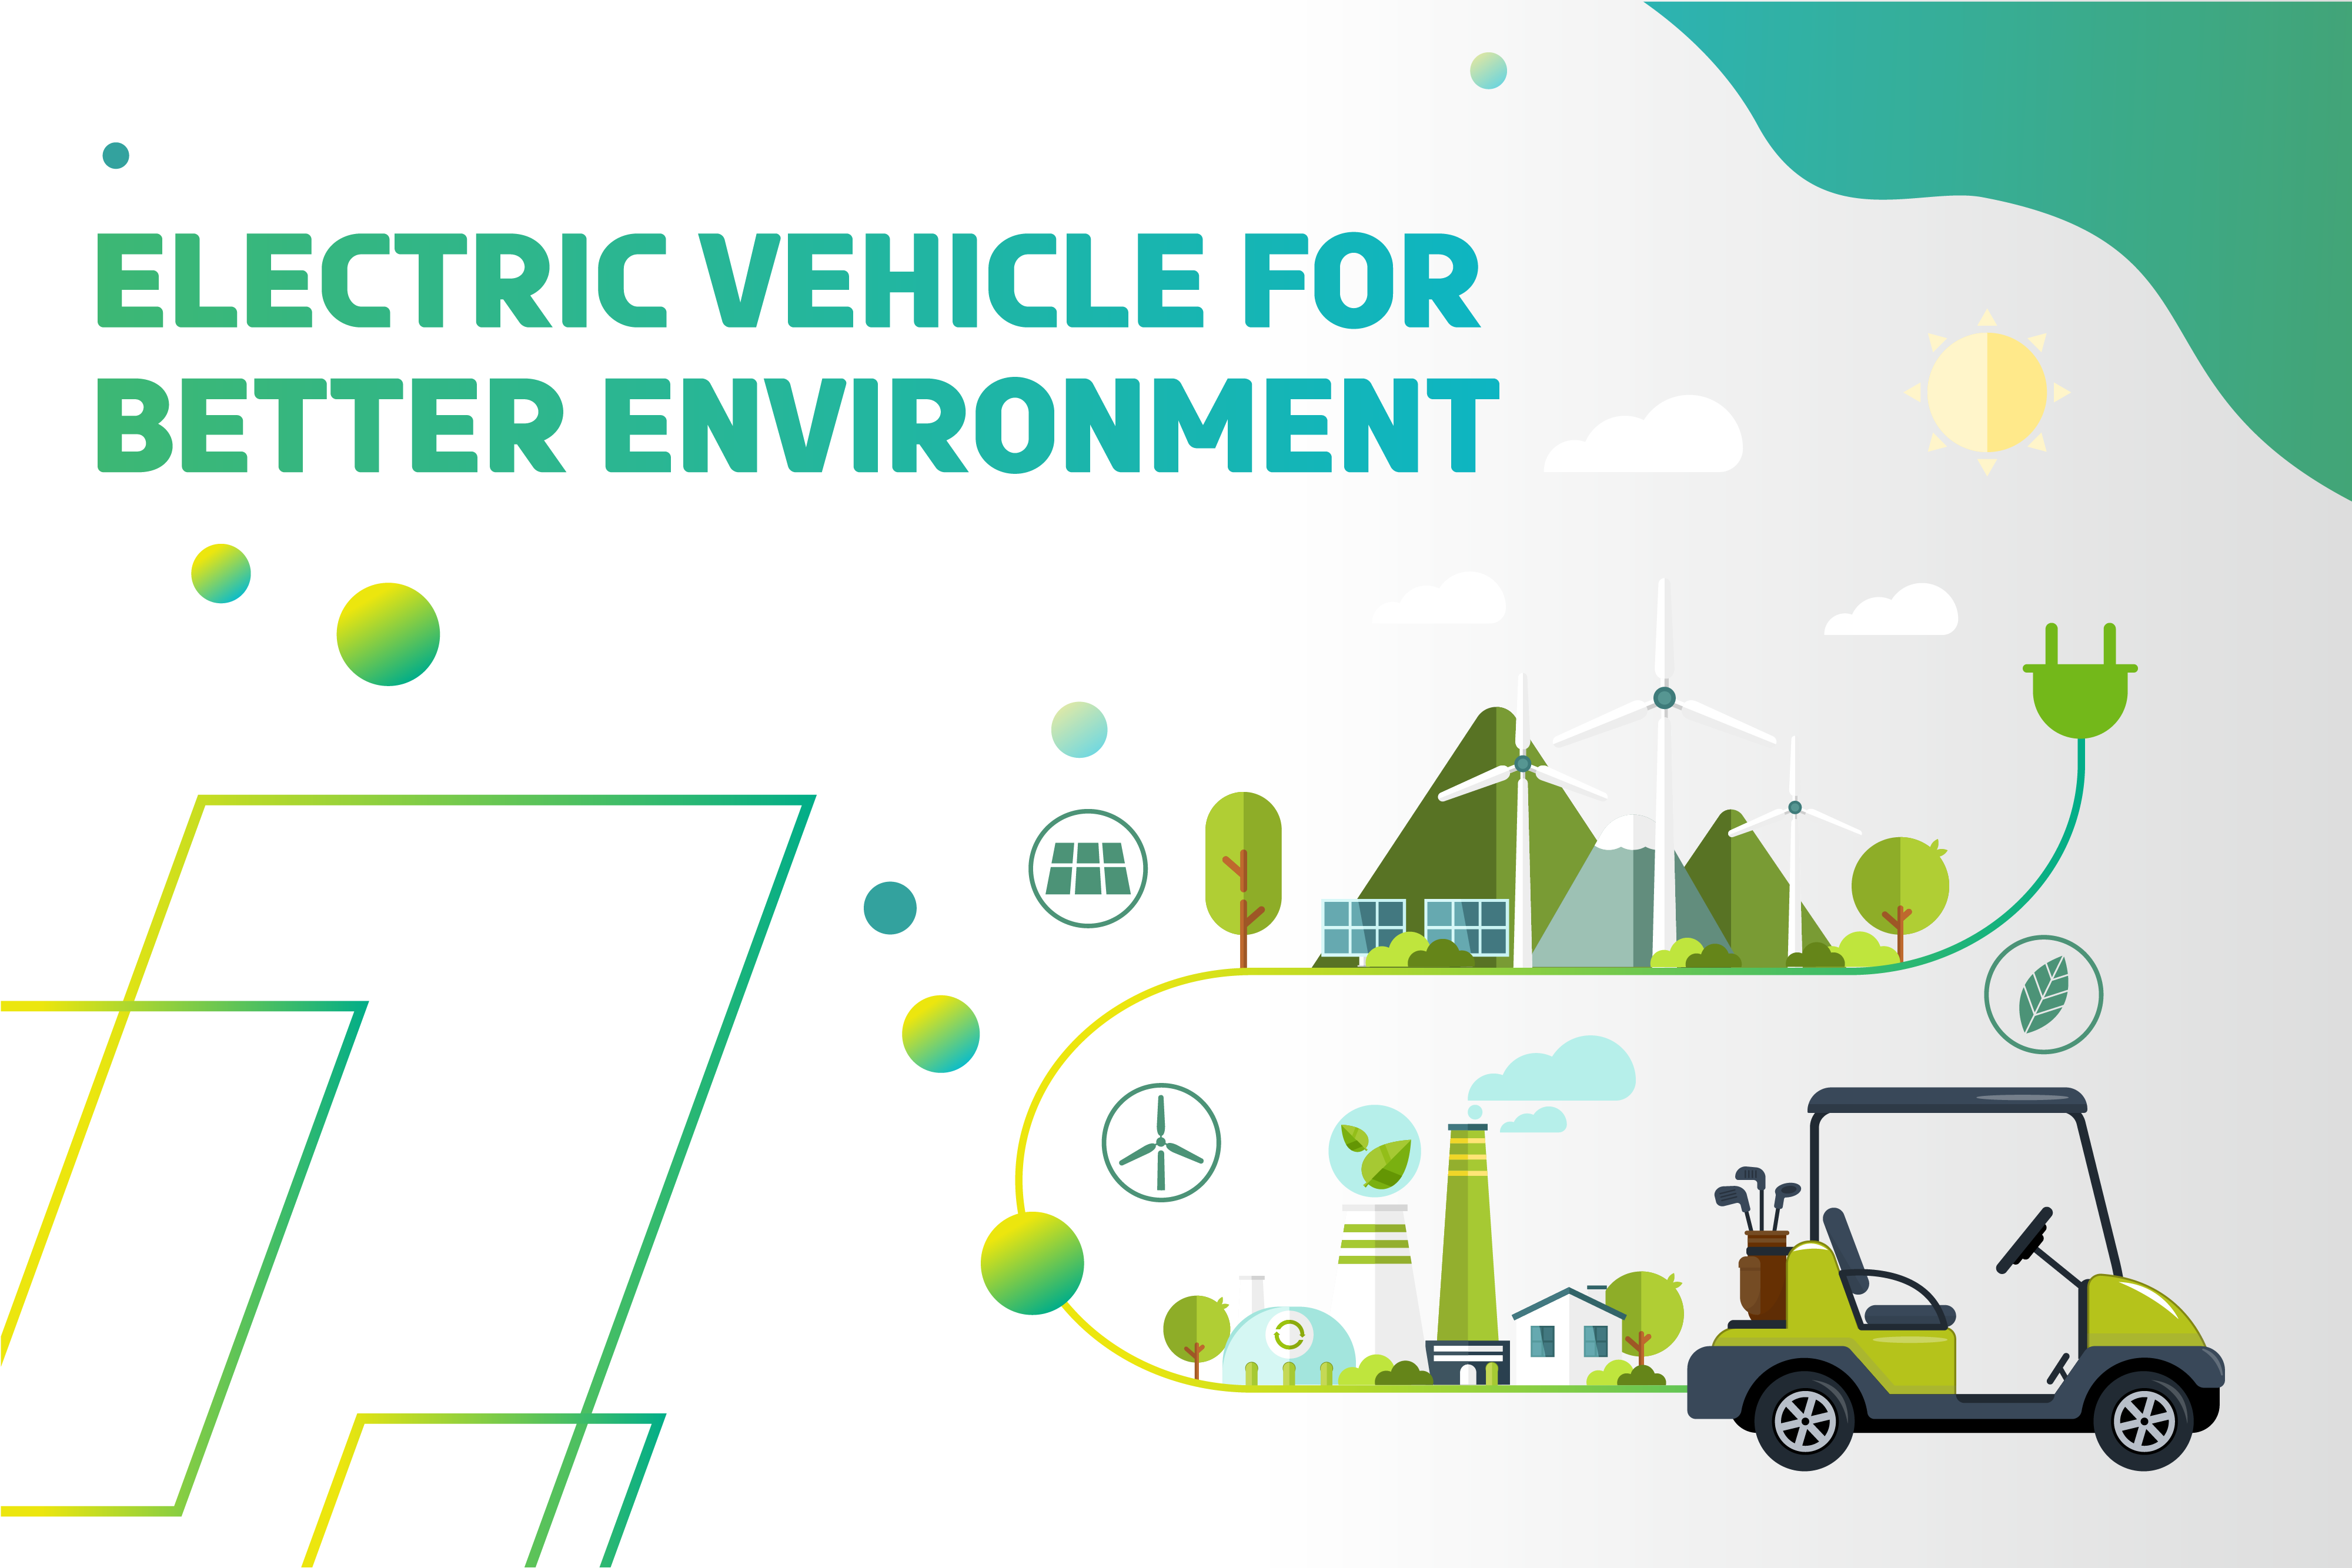 ELECTRIC VEHICLE FOR BETTER ENVIRONMENT Club Car Indonesia